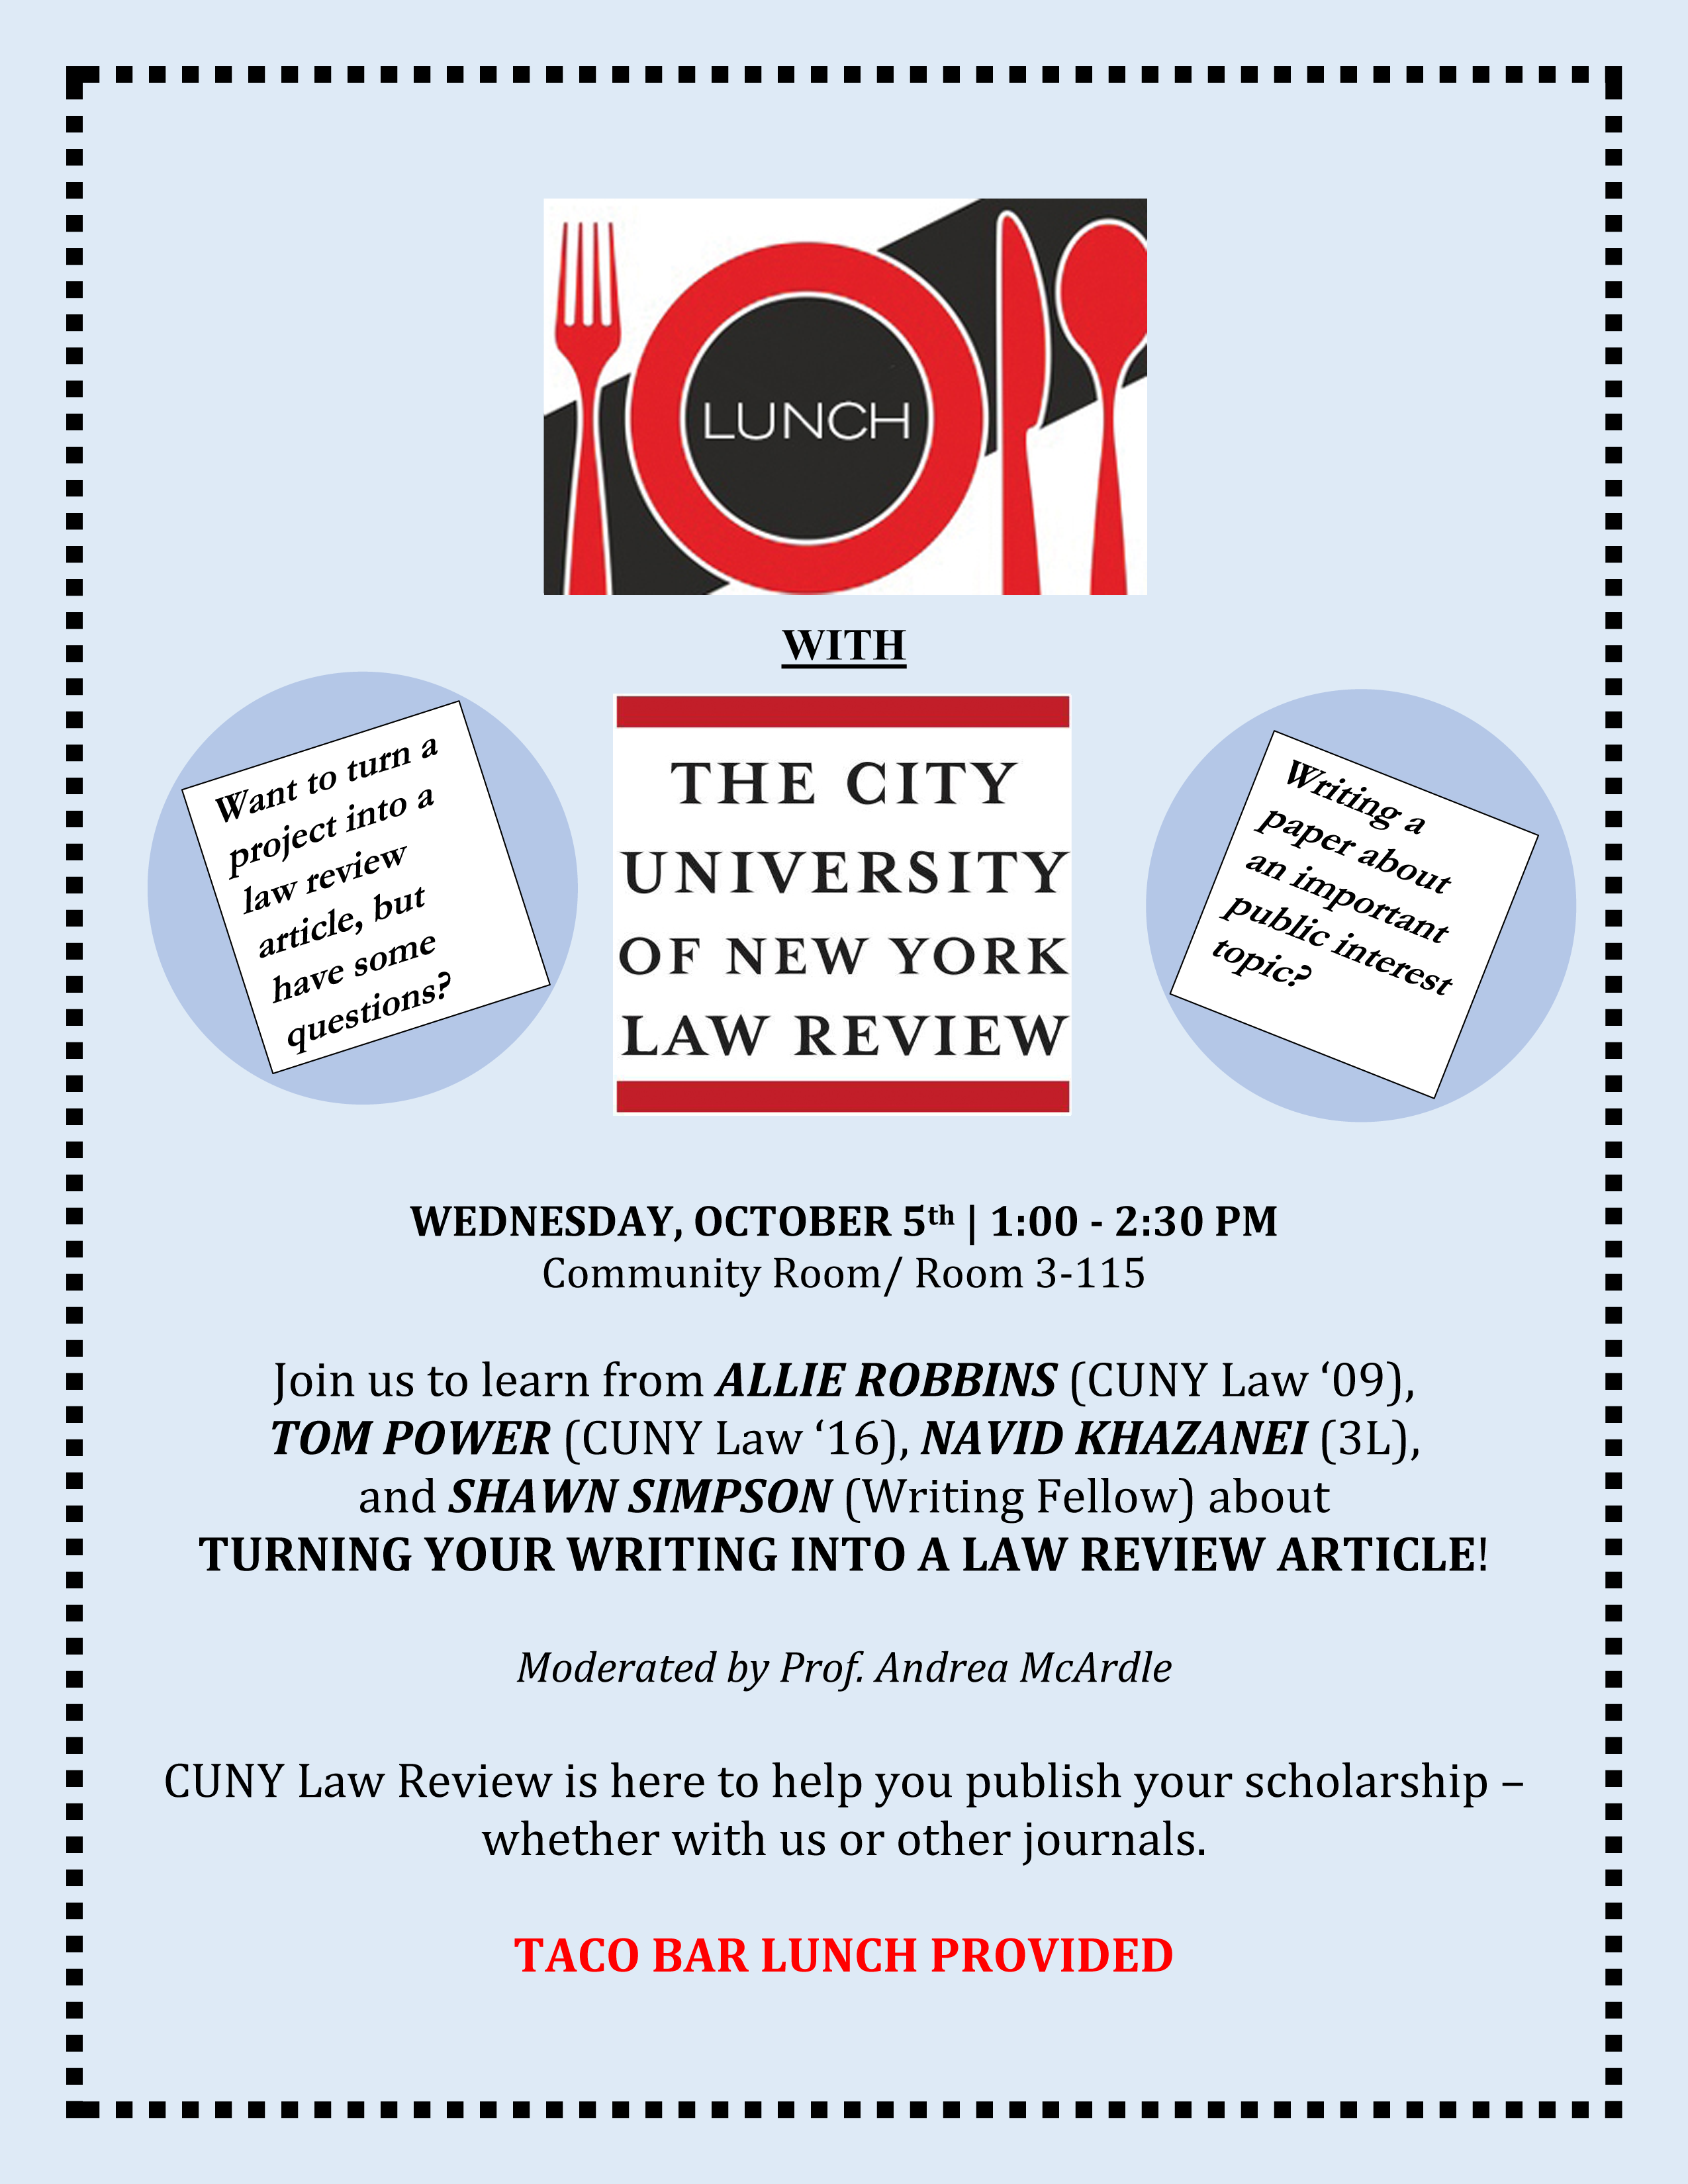 lunch-with-cuny-law-review